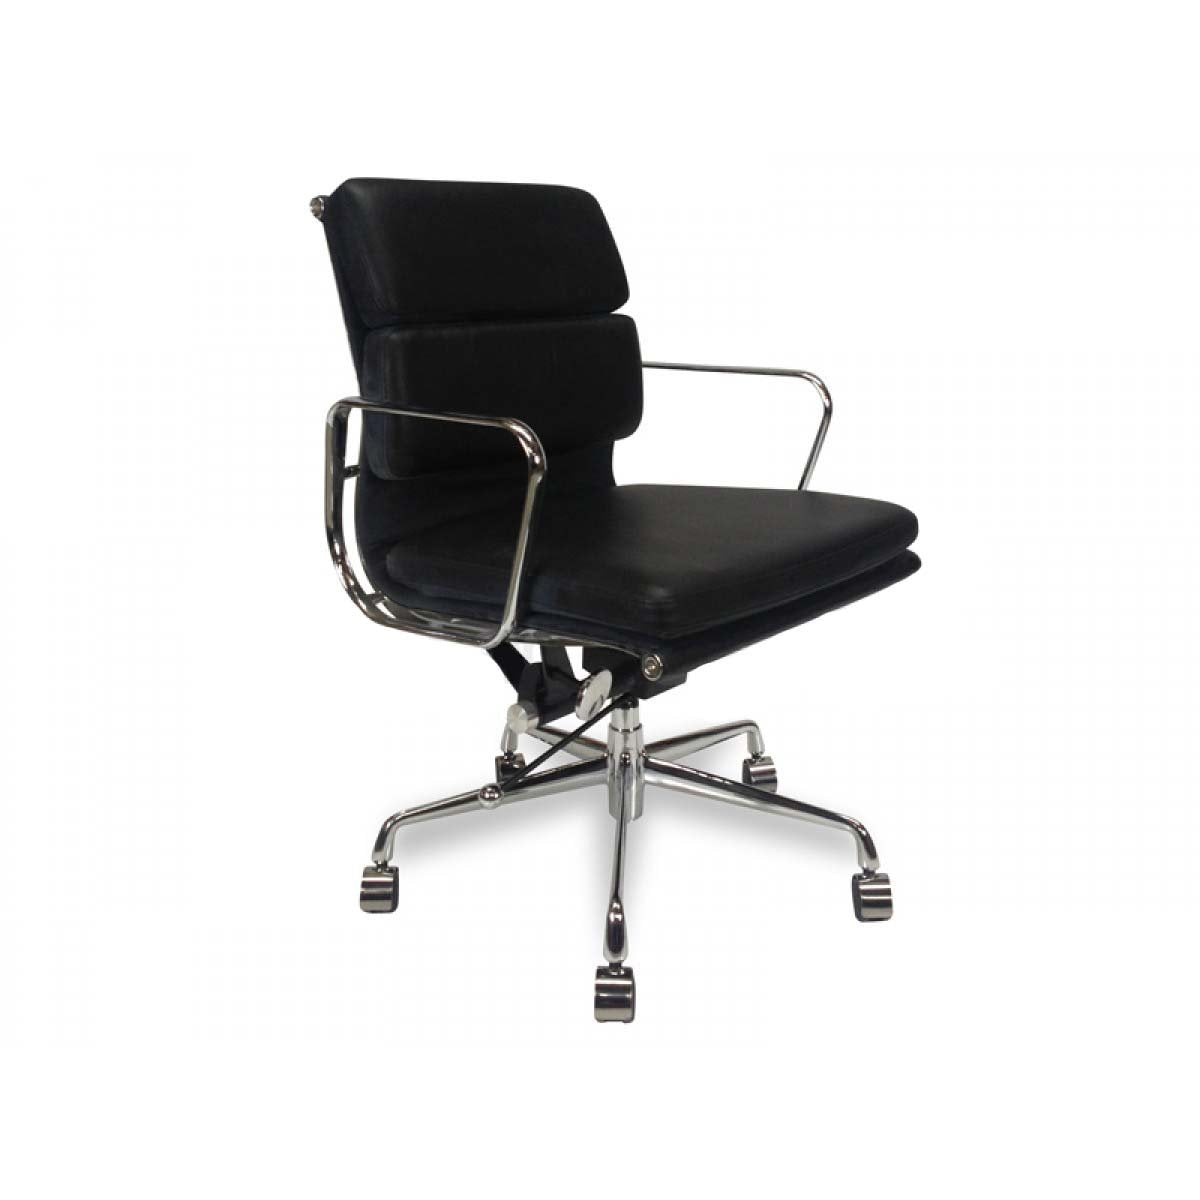 Low Back Office Chair - Black Leather